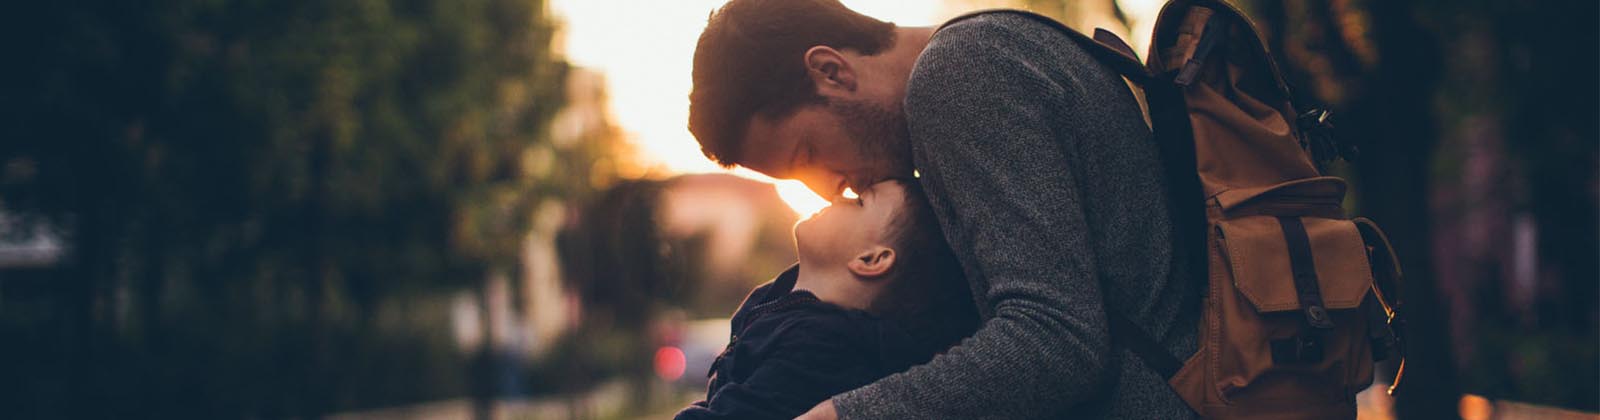 man kissing his son's forehead while outdoors